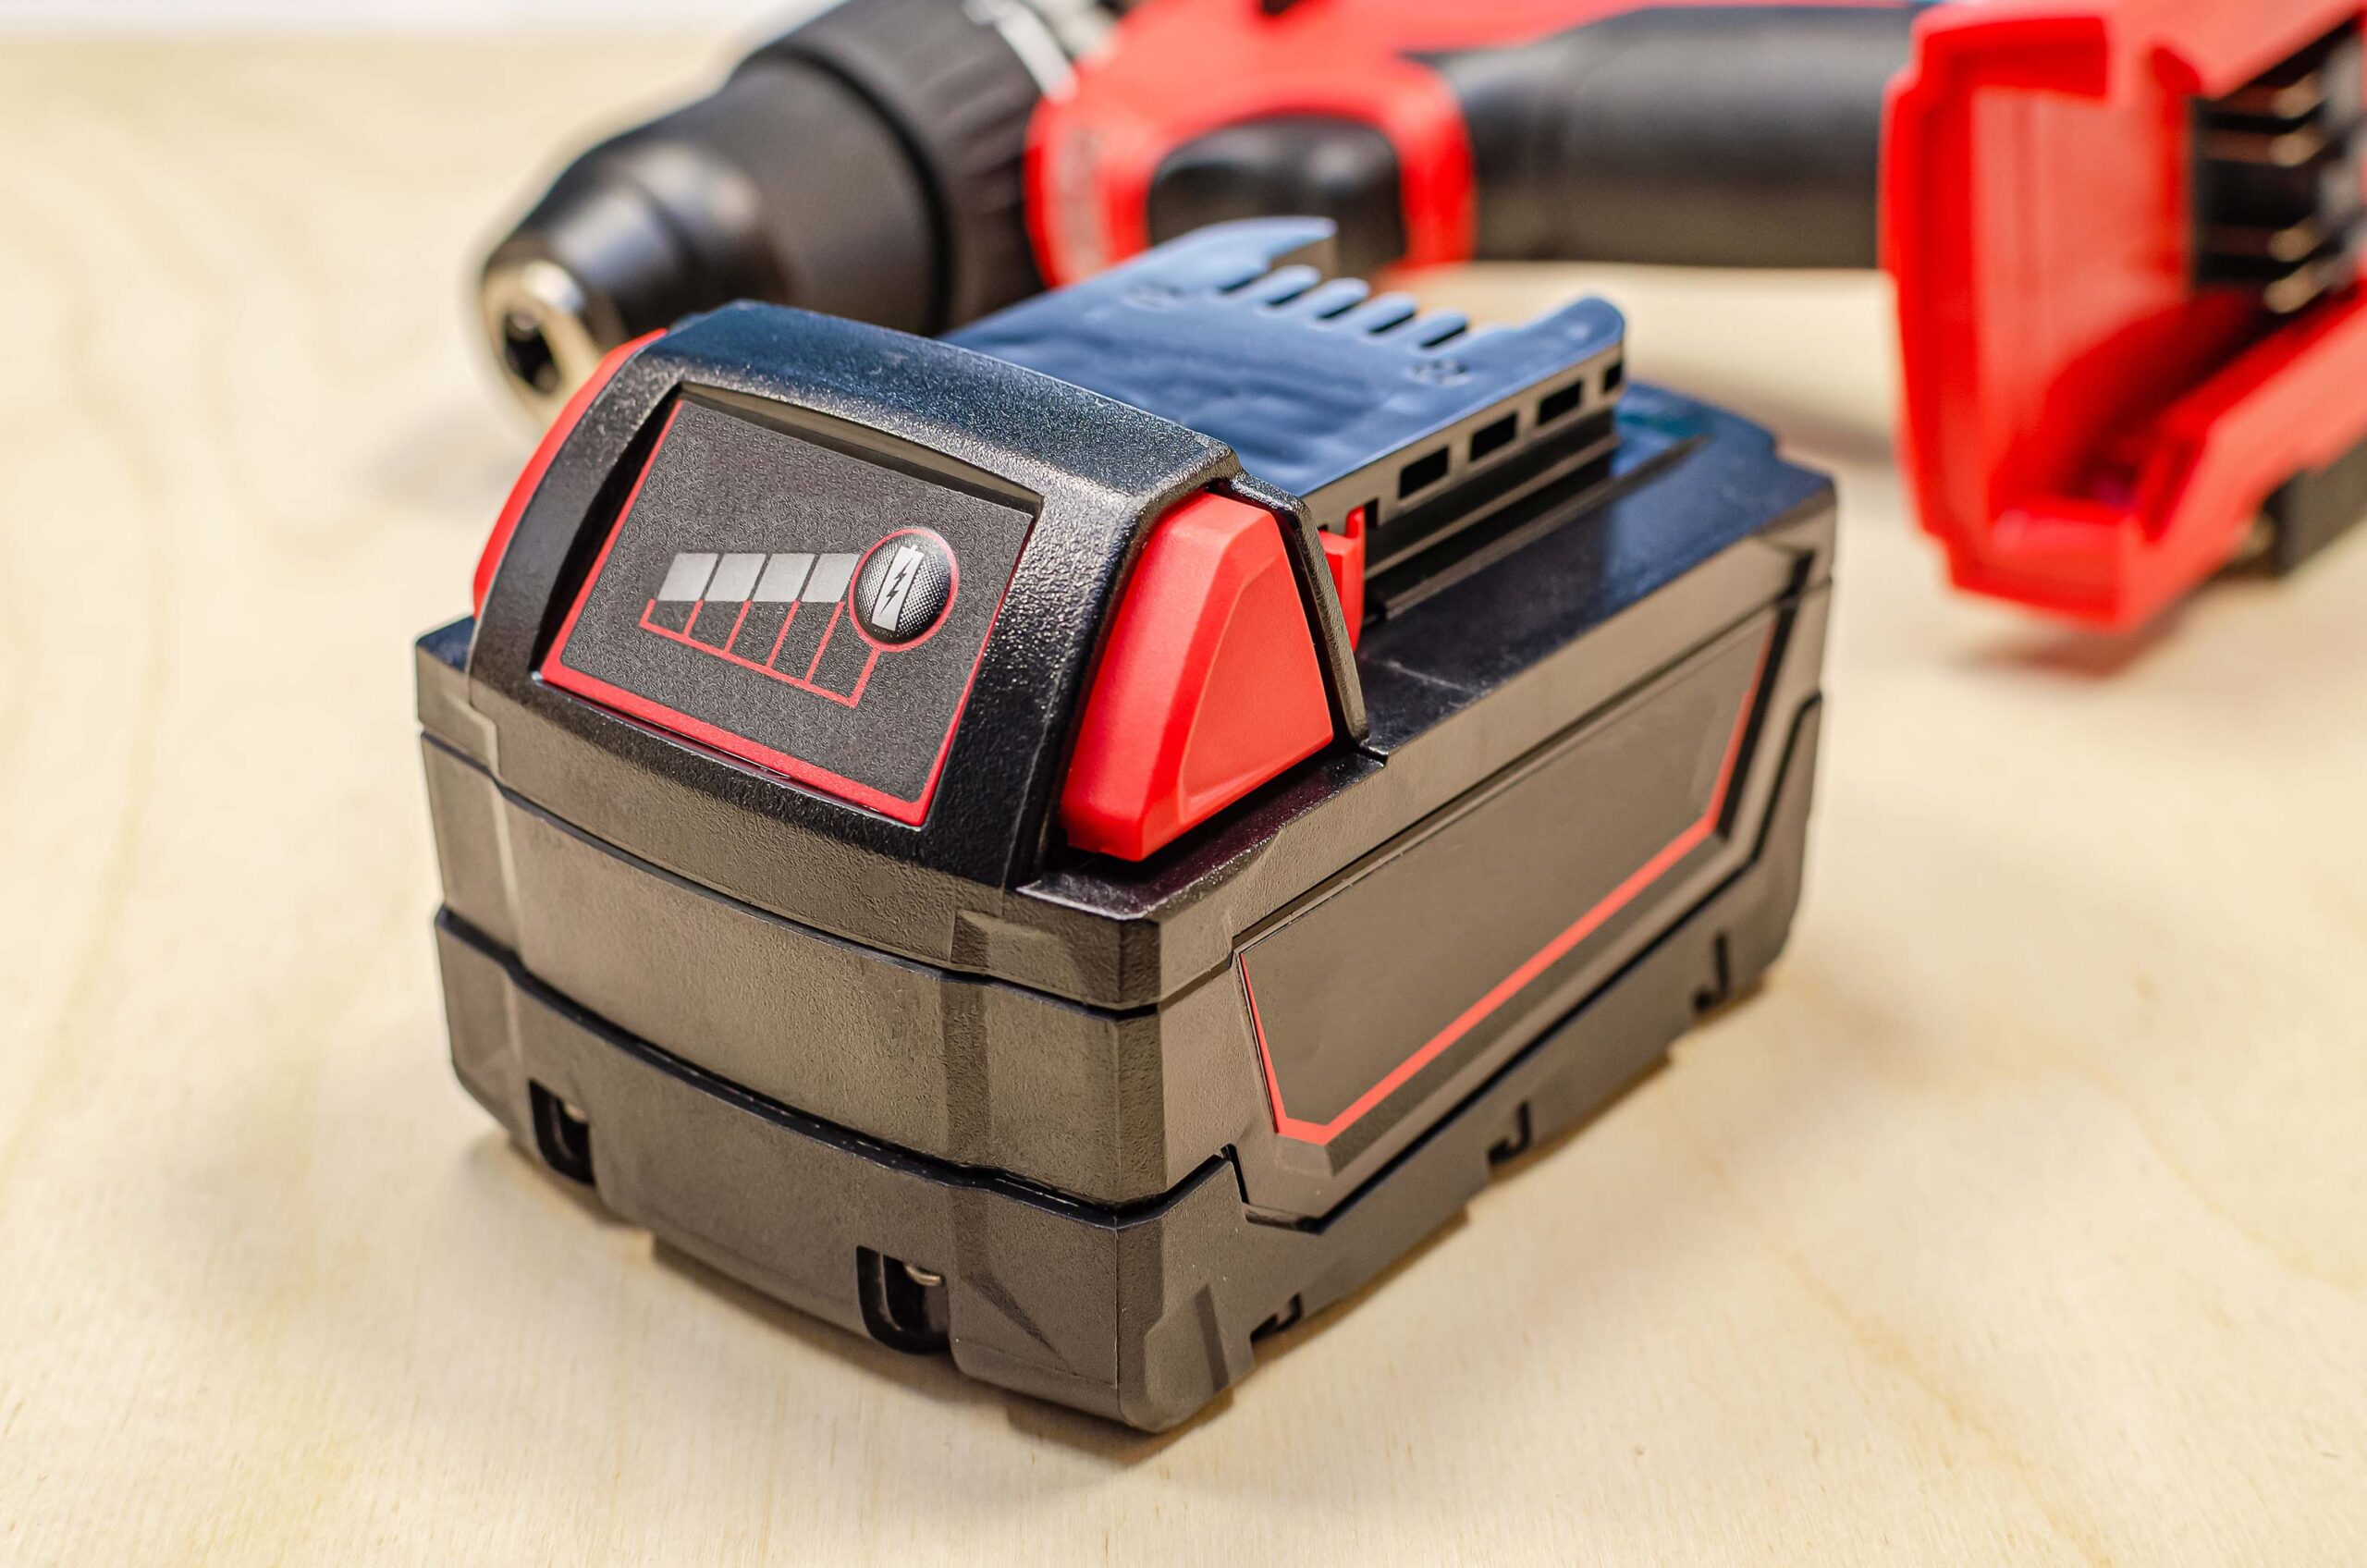 How to Extend the Battery Life of Your Cordless Power Tools